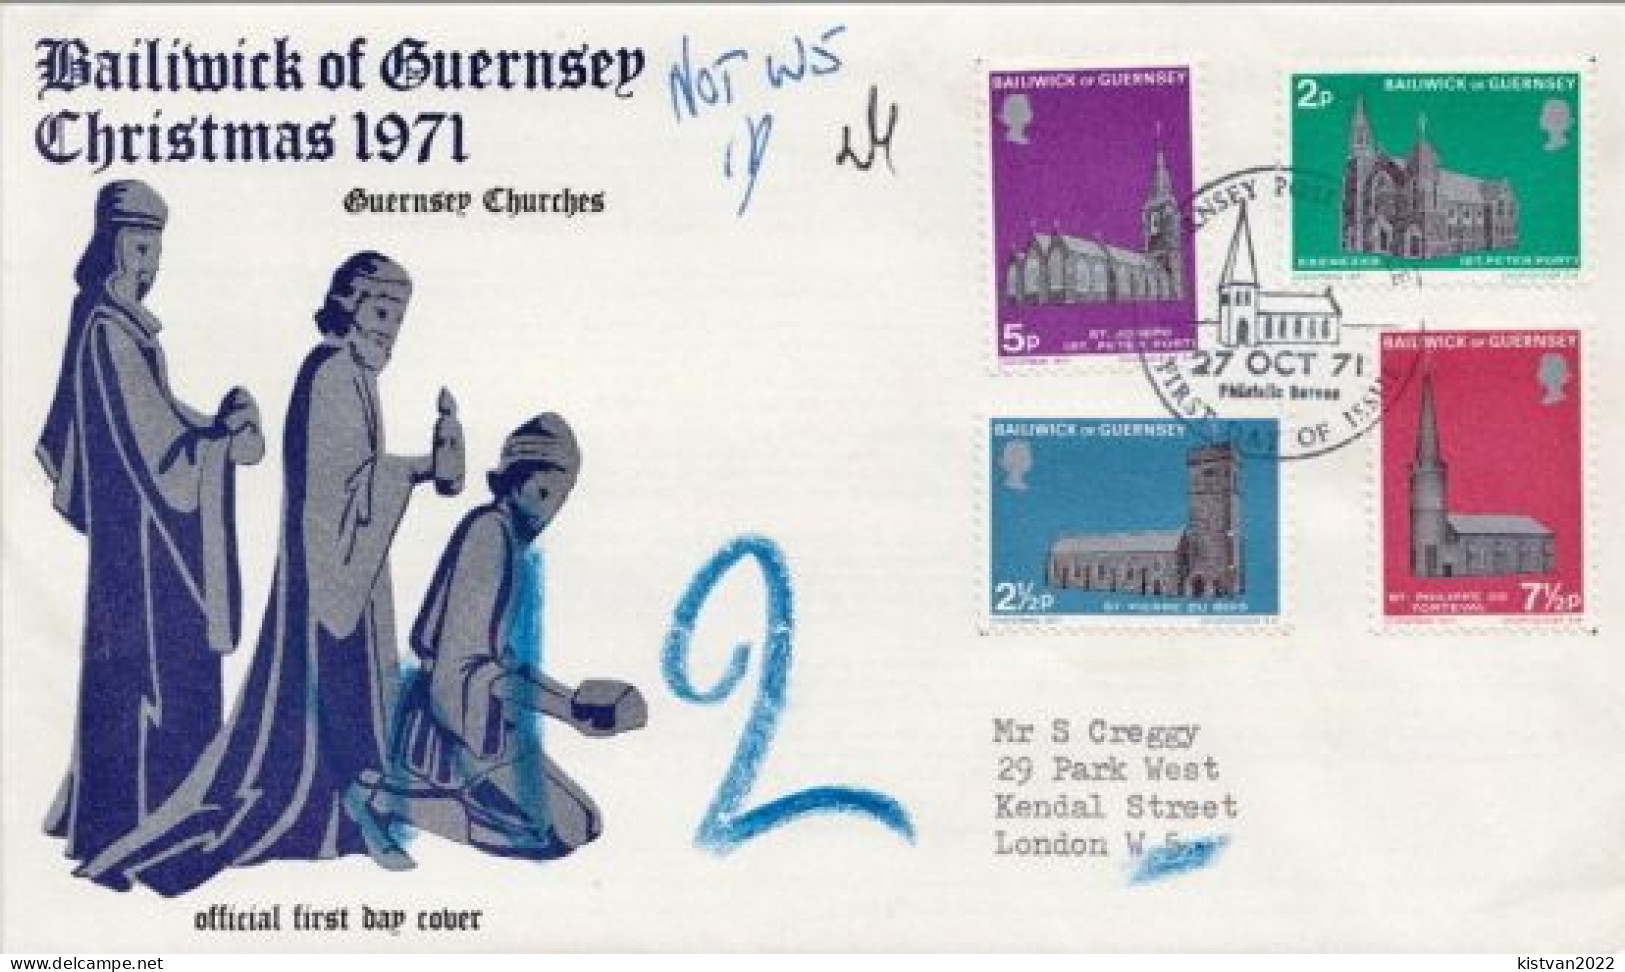 Guernsey Set On Used FDC - Churches & Cathedrals